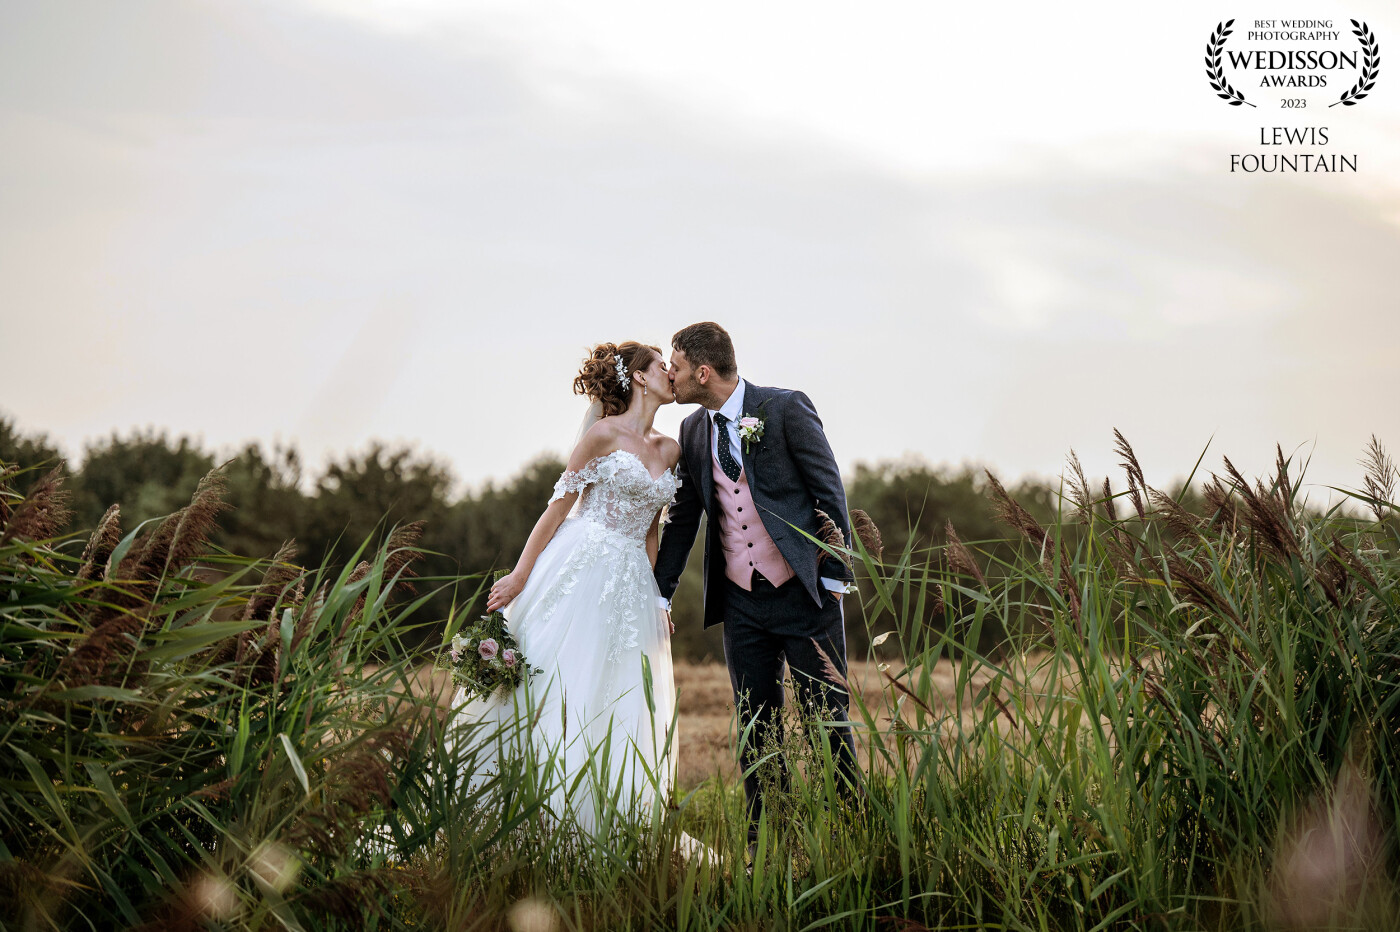 We got so many beautiful images at Klea & Daniels Old Hall Ely wedding, and we would normally include the lake in these type of shots, but the couple kissing through the reads seemed to warrant the focus to be on them.